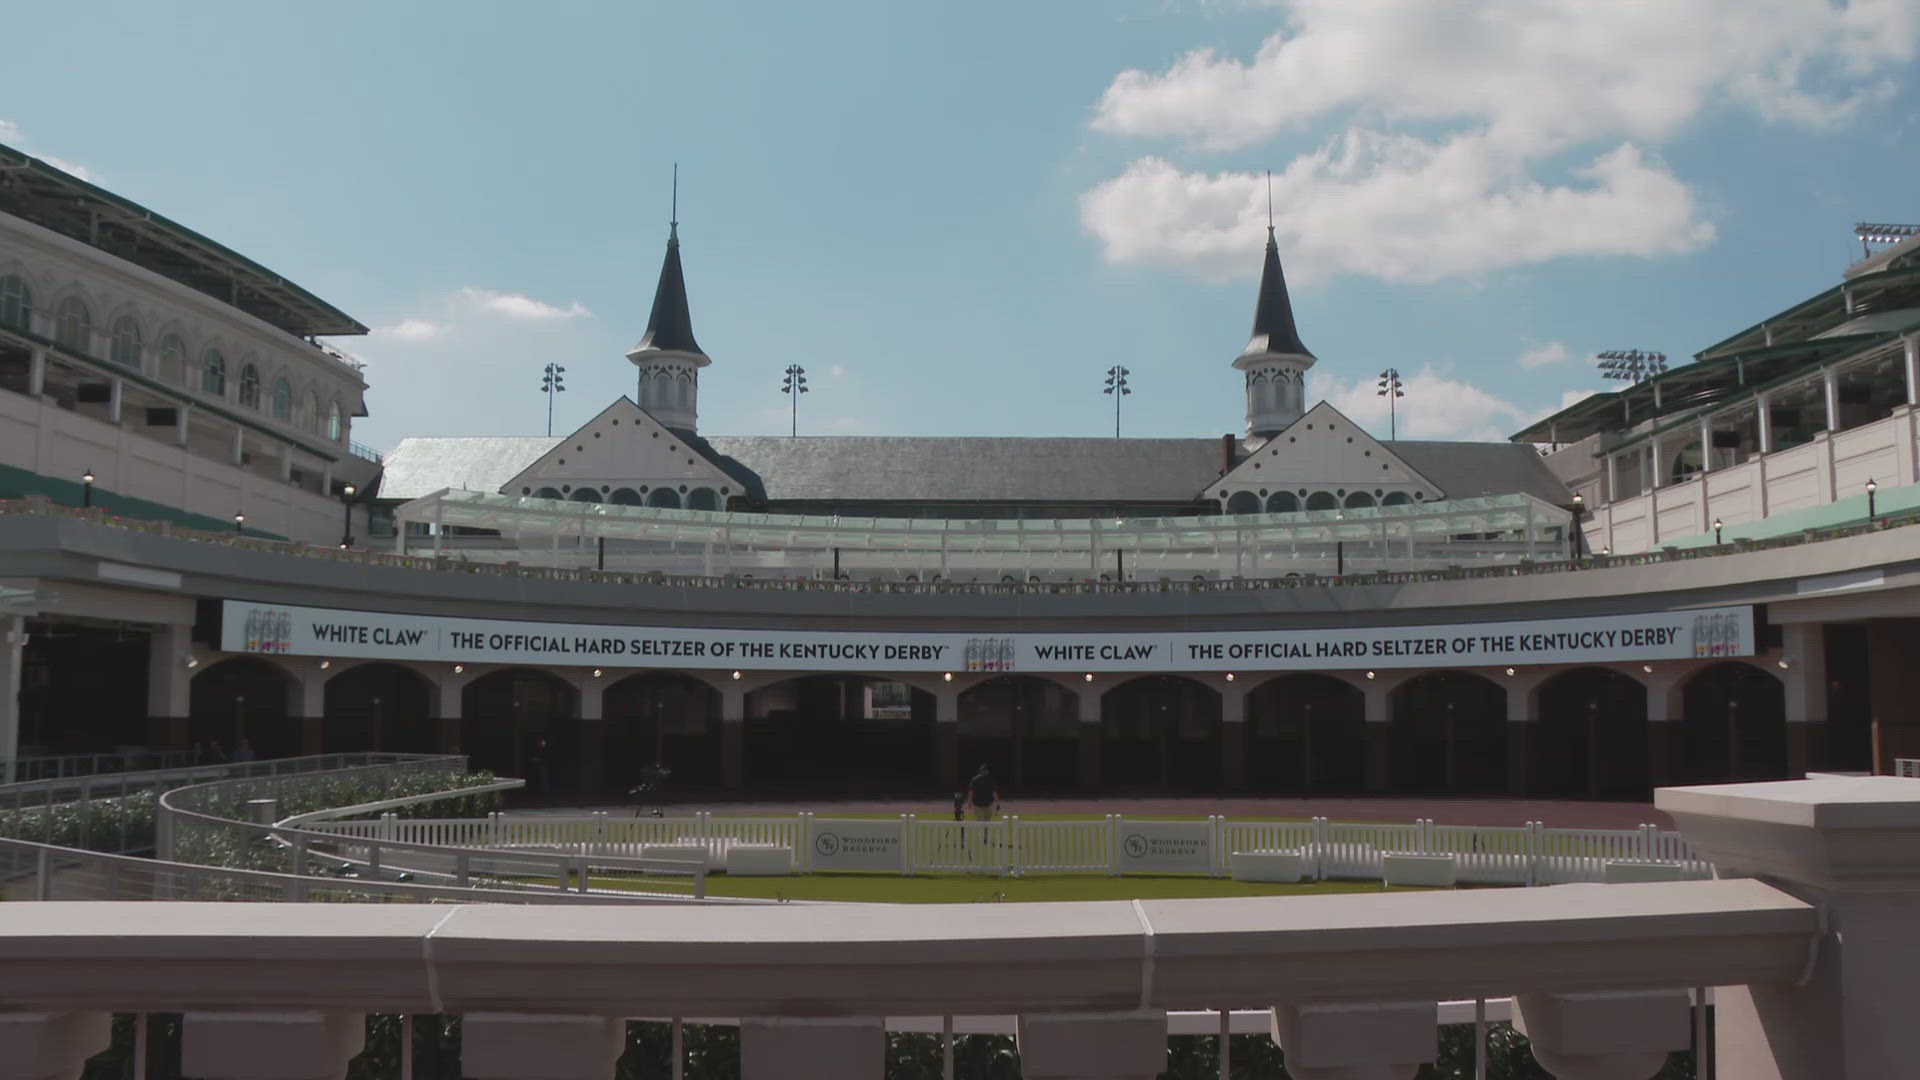 After two years of construction, the paddock now brings the iconic spires and athletic spectacle together.